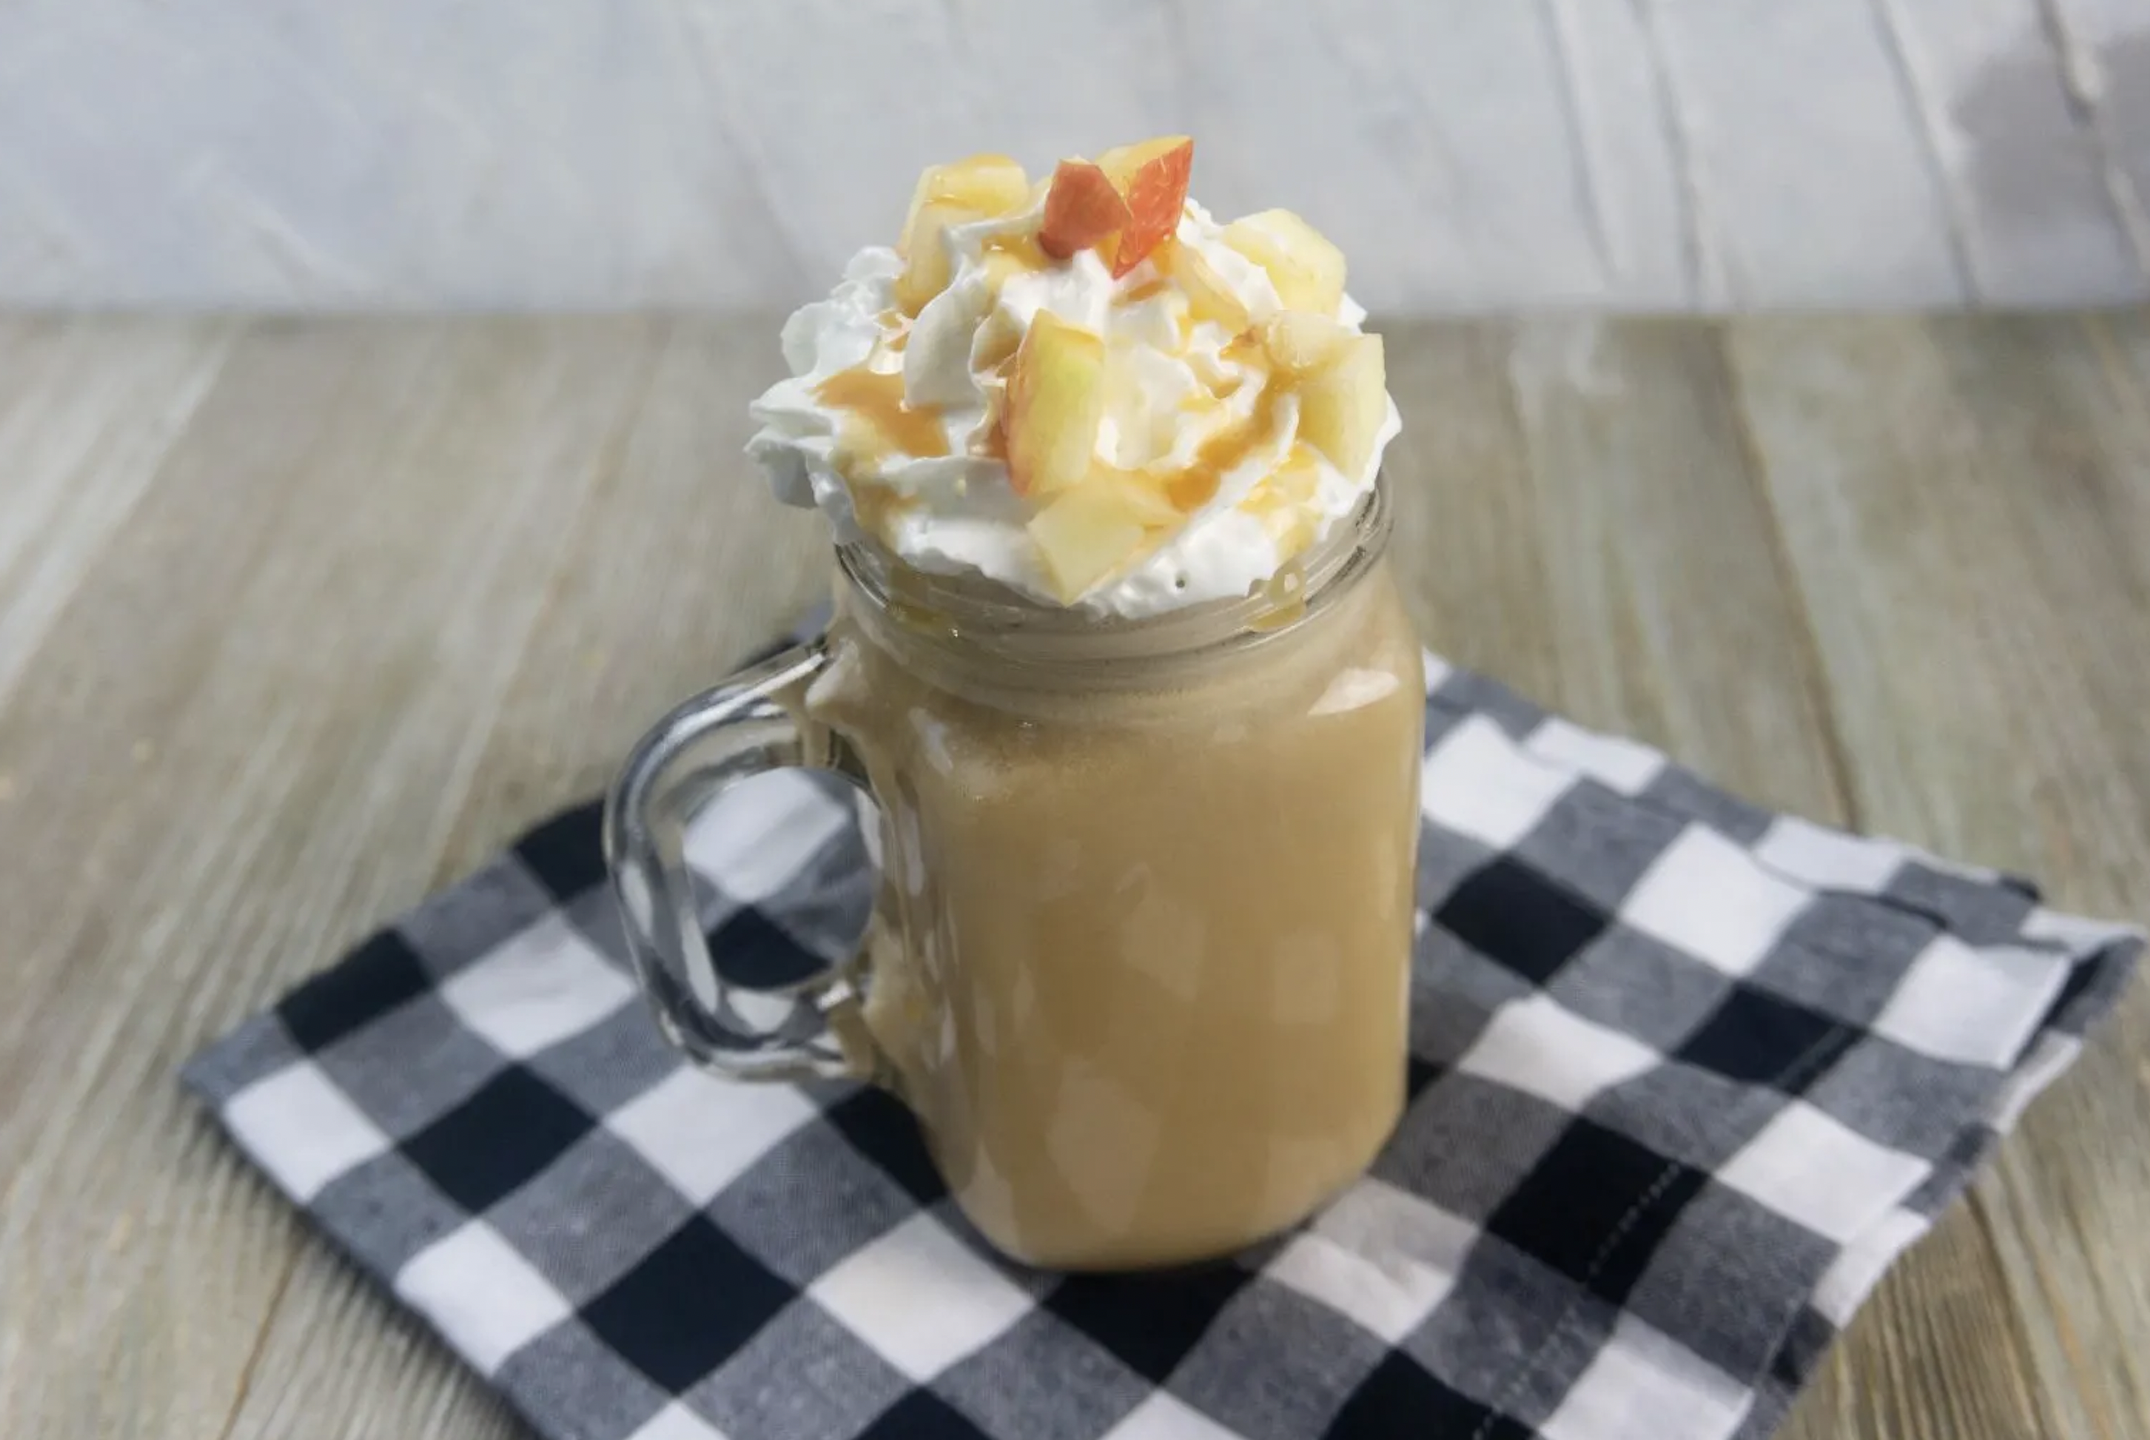 Enjoy this ginger snap and pumpkin frappe at home – the perfect combination of fall flavors.<p><b><a href="https://masonjarrecipe.com/pumpkin-ginger-snap-frappuccino-recipe/">Get recipe</a></b></p>